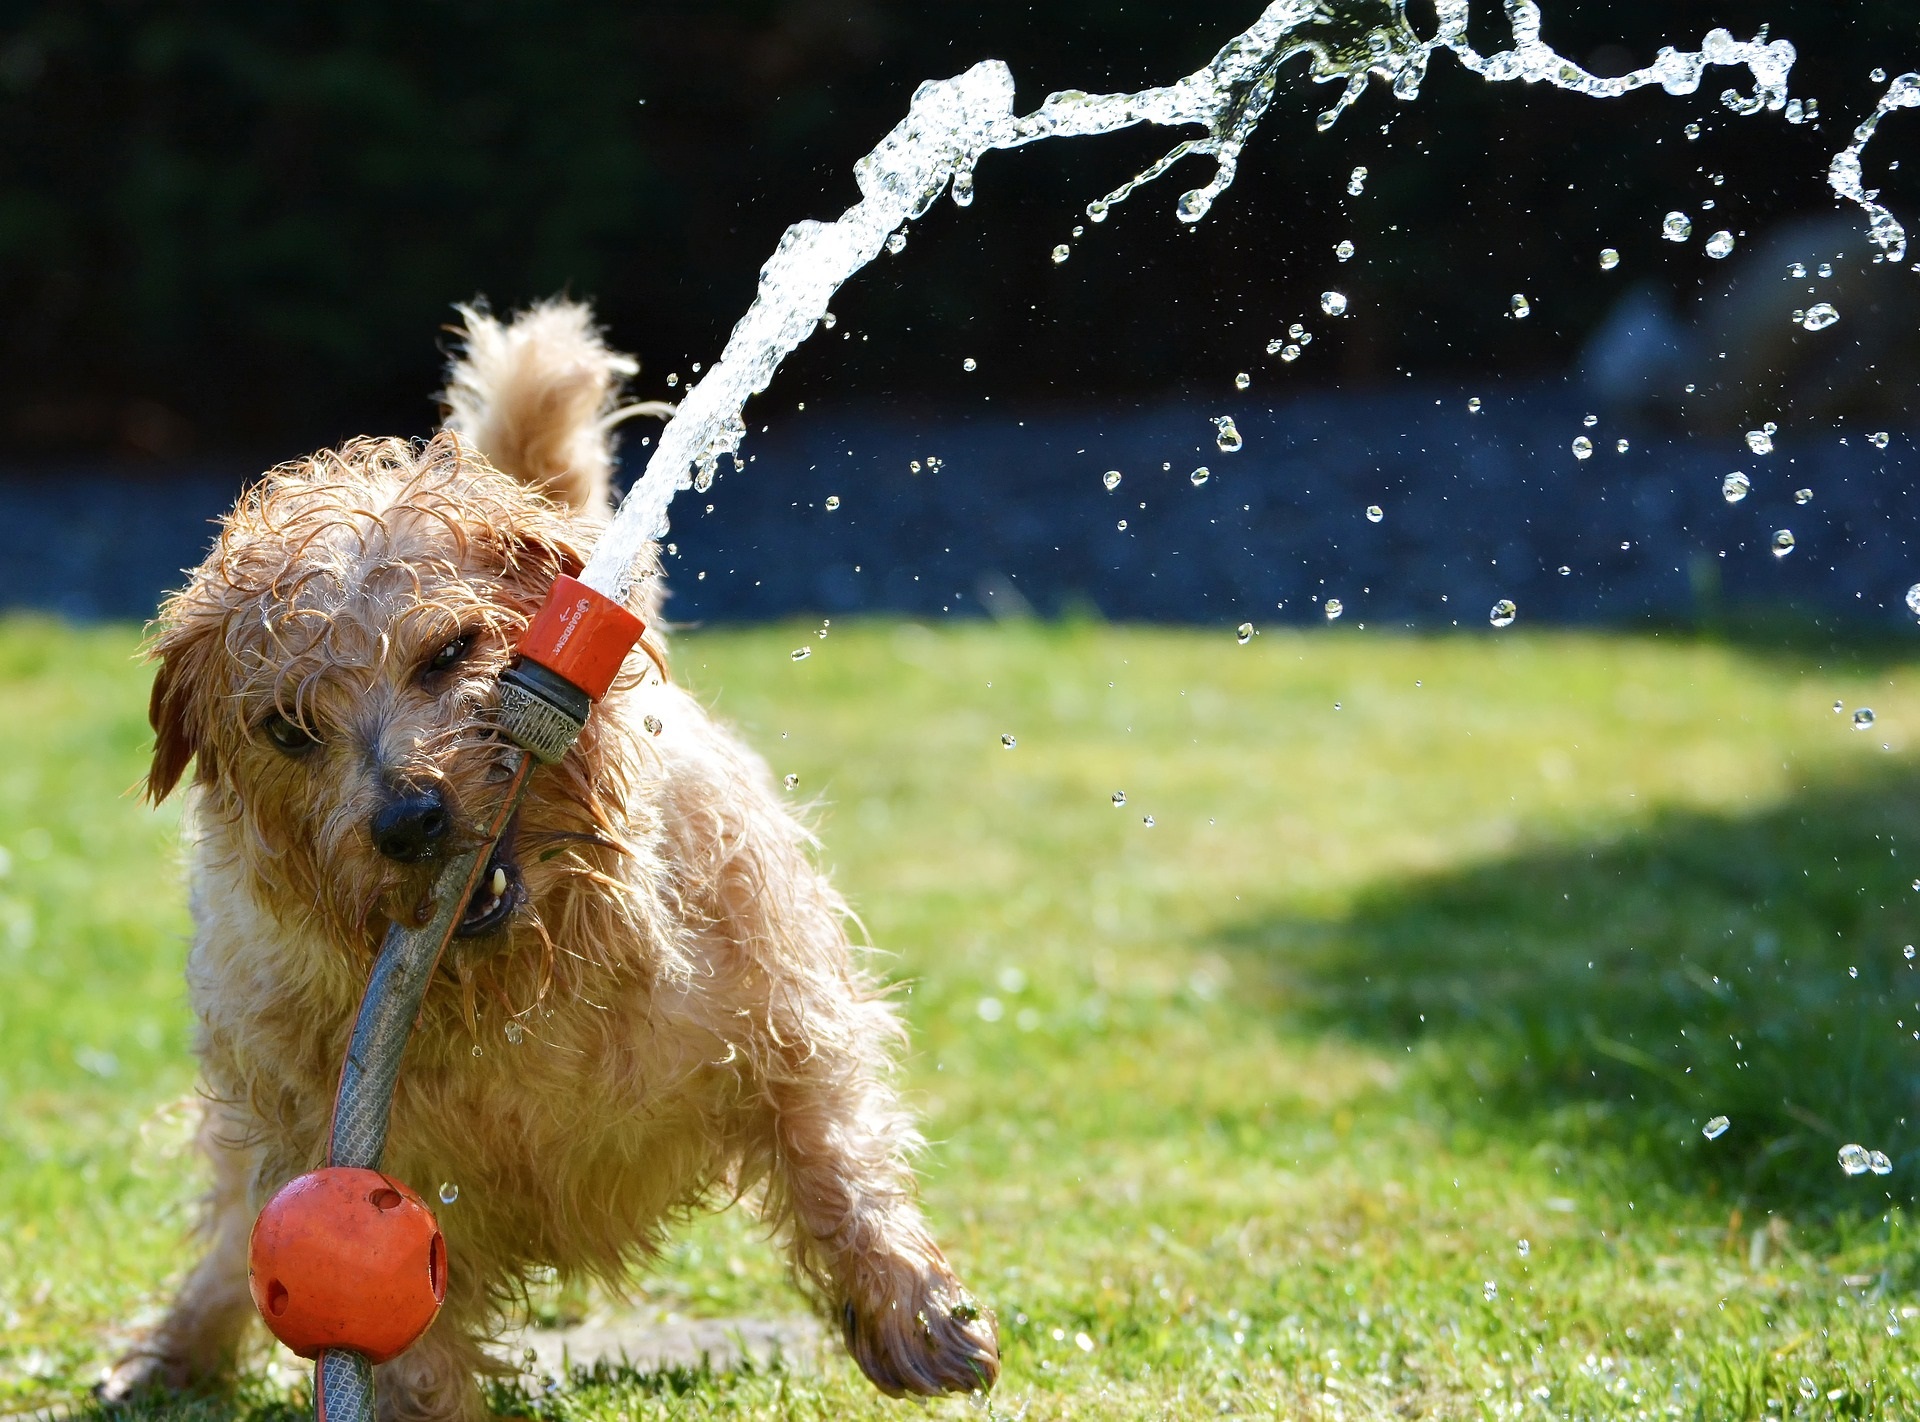 Keeping your lawn and plants healthy and happy during the hot summer months – they need water.